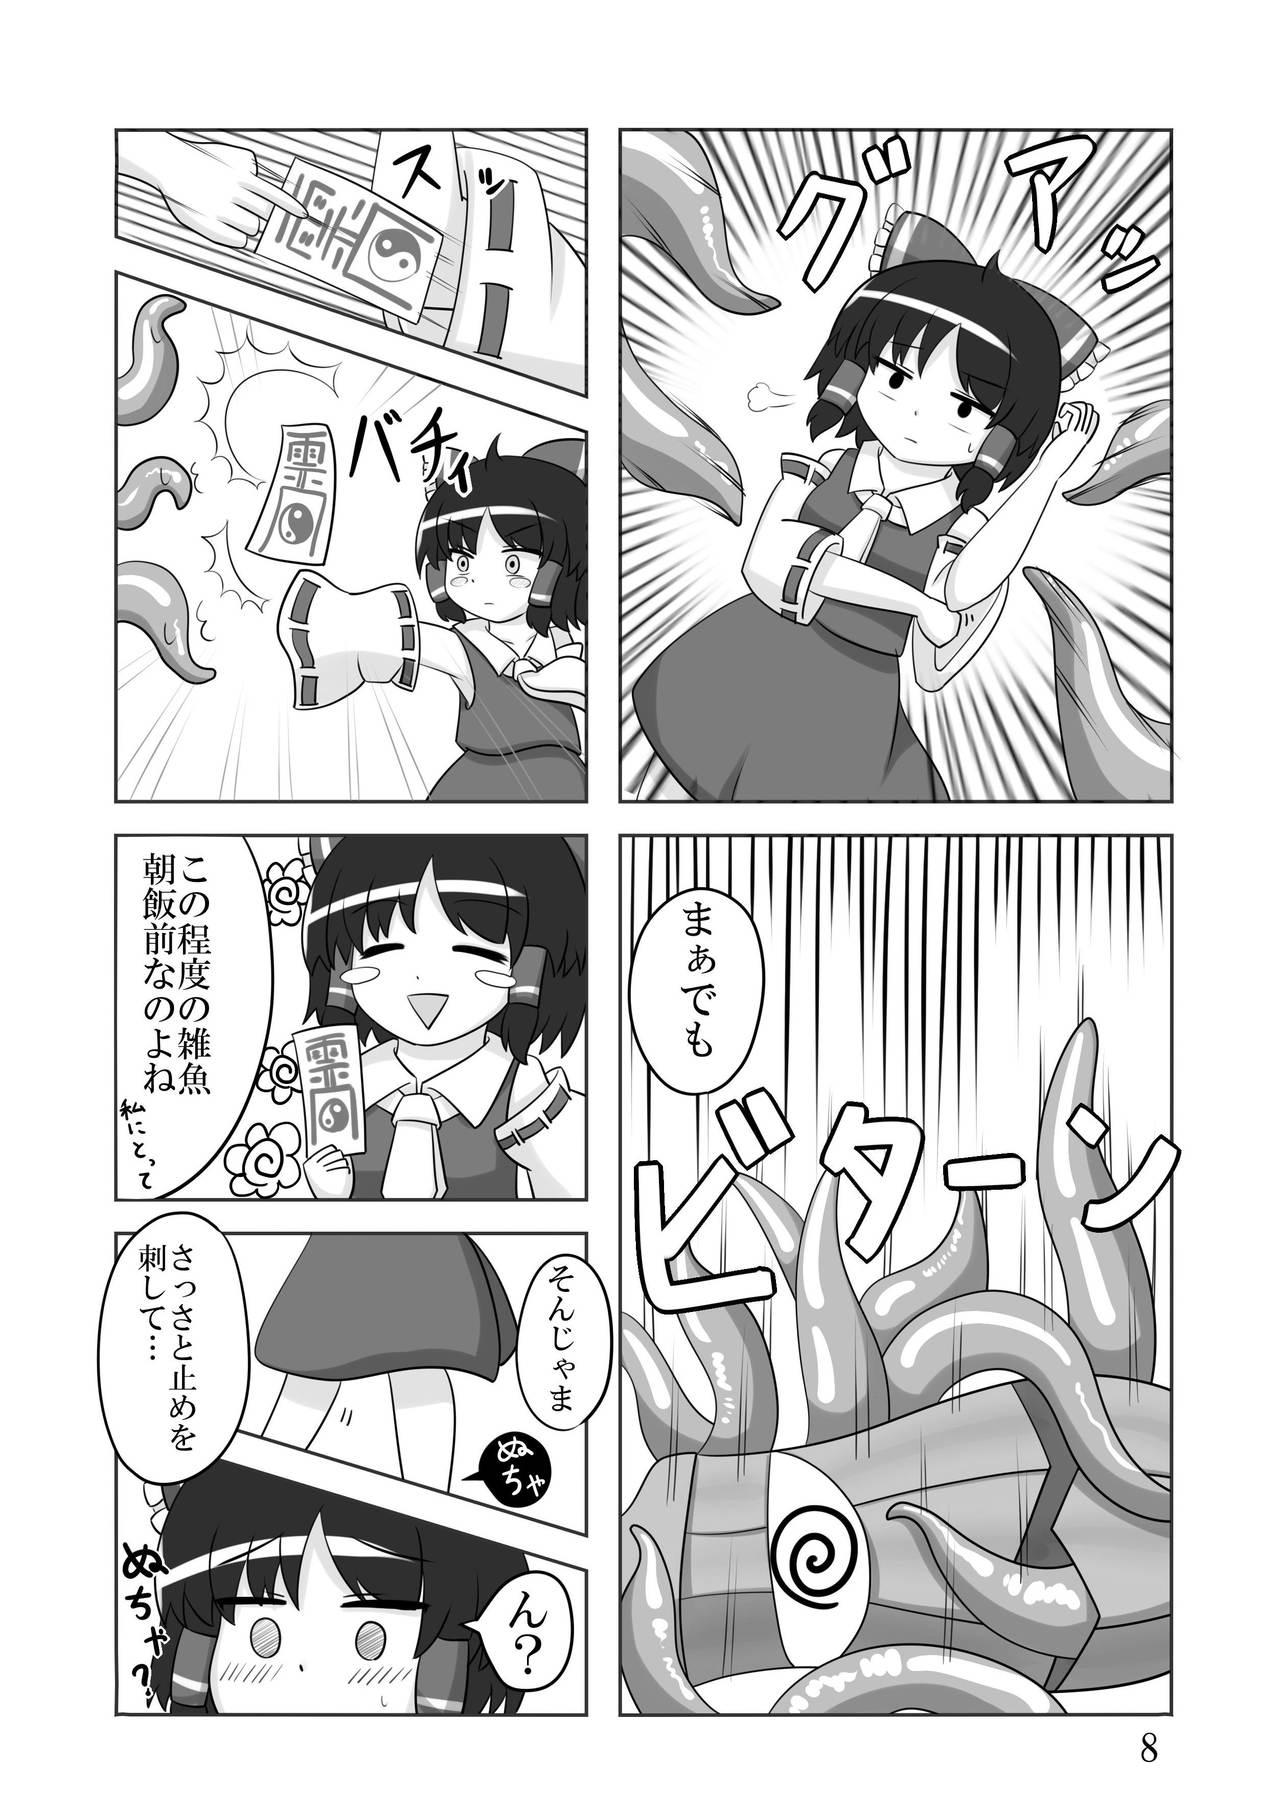 Oral Okra Crisis - Touhou project Babes - Page 7